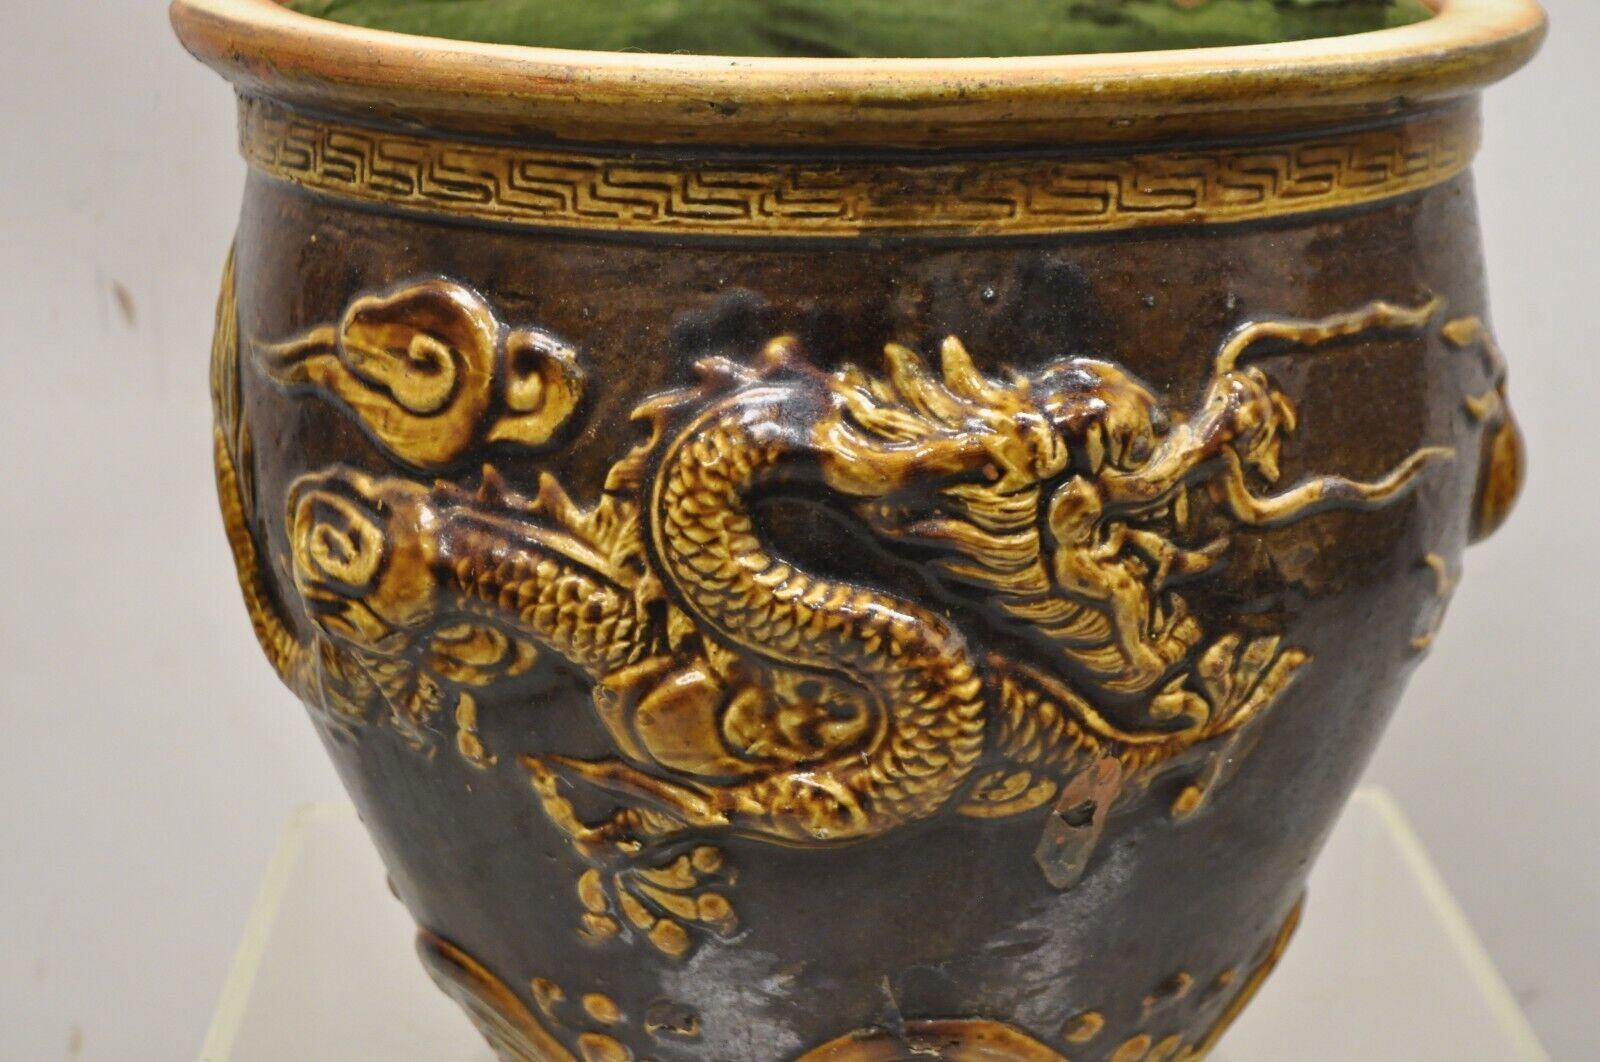 20th Century Vintage Chinese Brown Glazed Ceramic Dragon Cachepot Planter Pot - a Pair For Sale